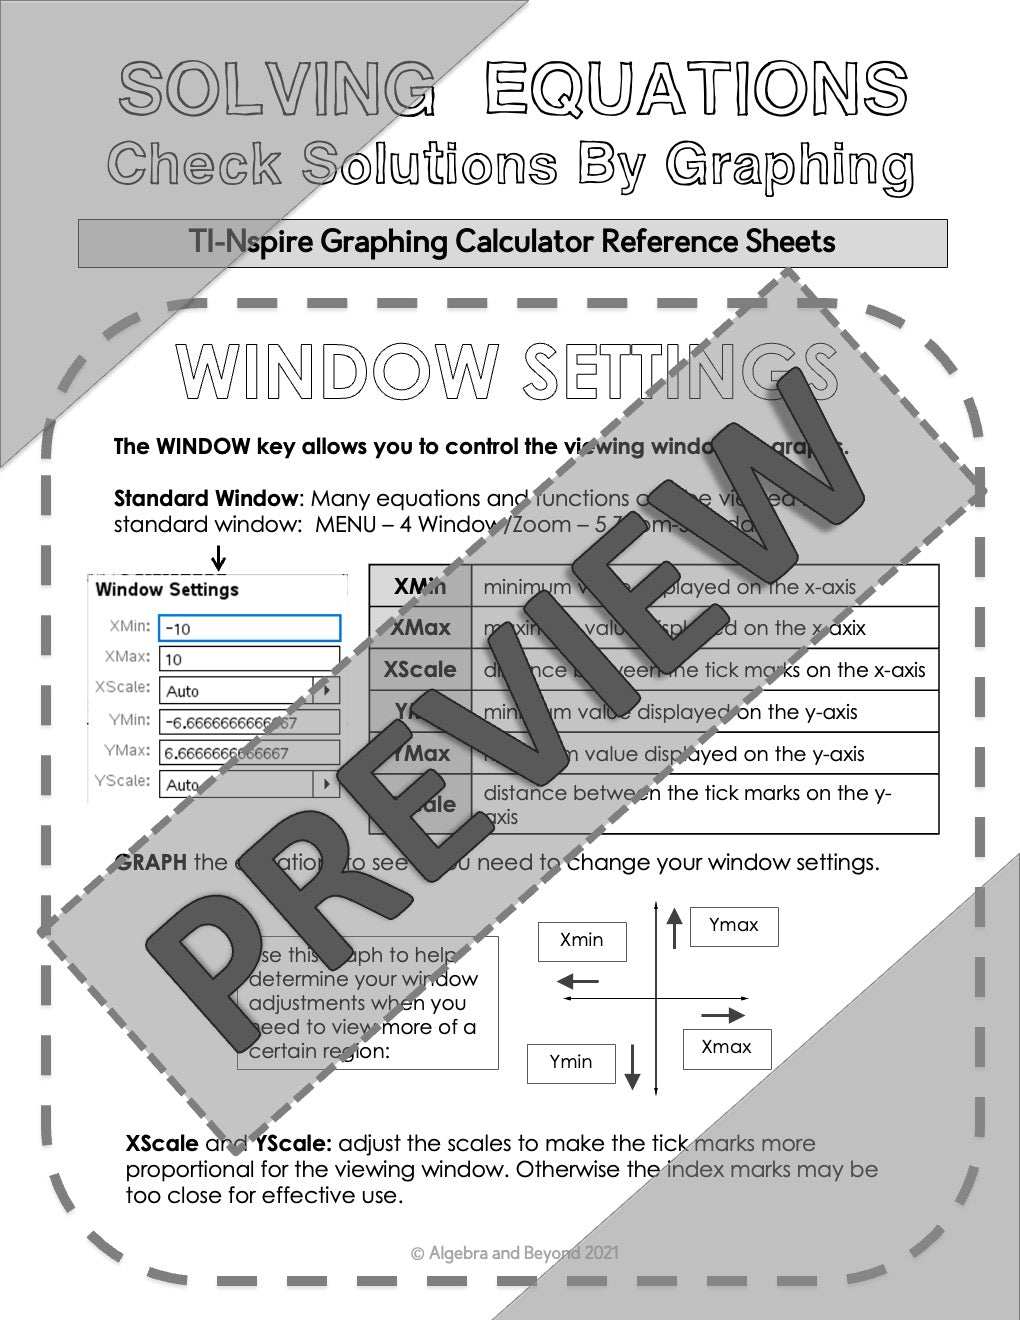 TI-Nspire Calculator Sheet | Window Settings and Graphing Equations